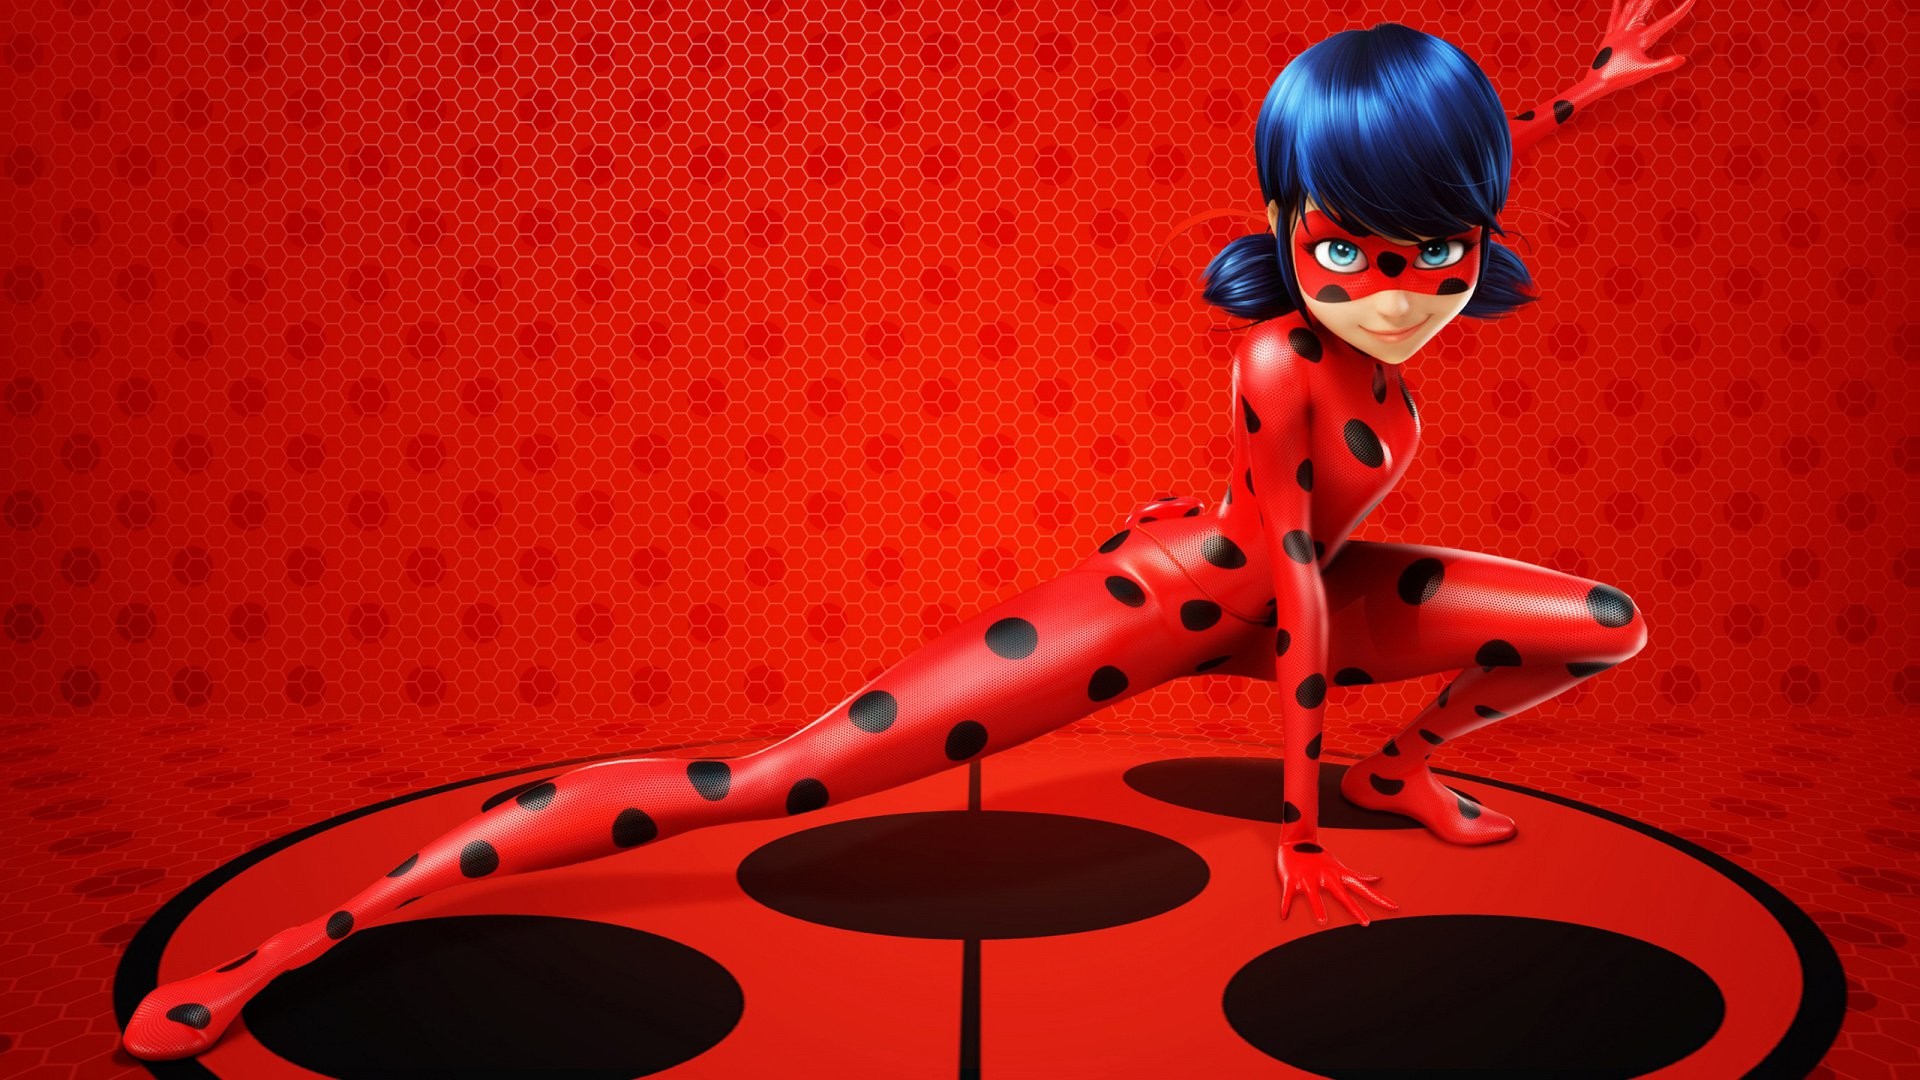 1920x1080 Zeichentrick - Miraculous: Tales of Ladybug & Cat Noir Ladybug (Miraculous  Ladybug) Wallpaper